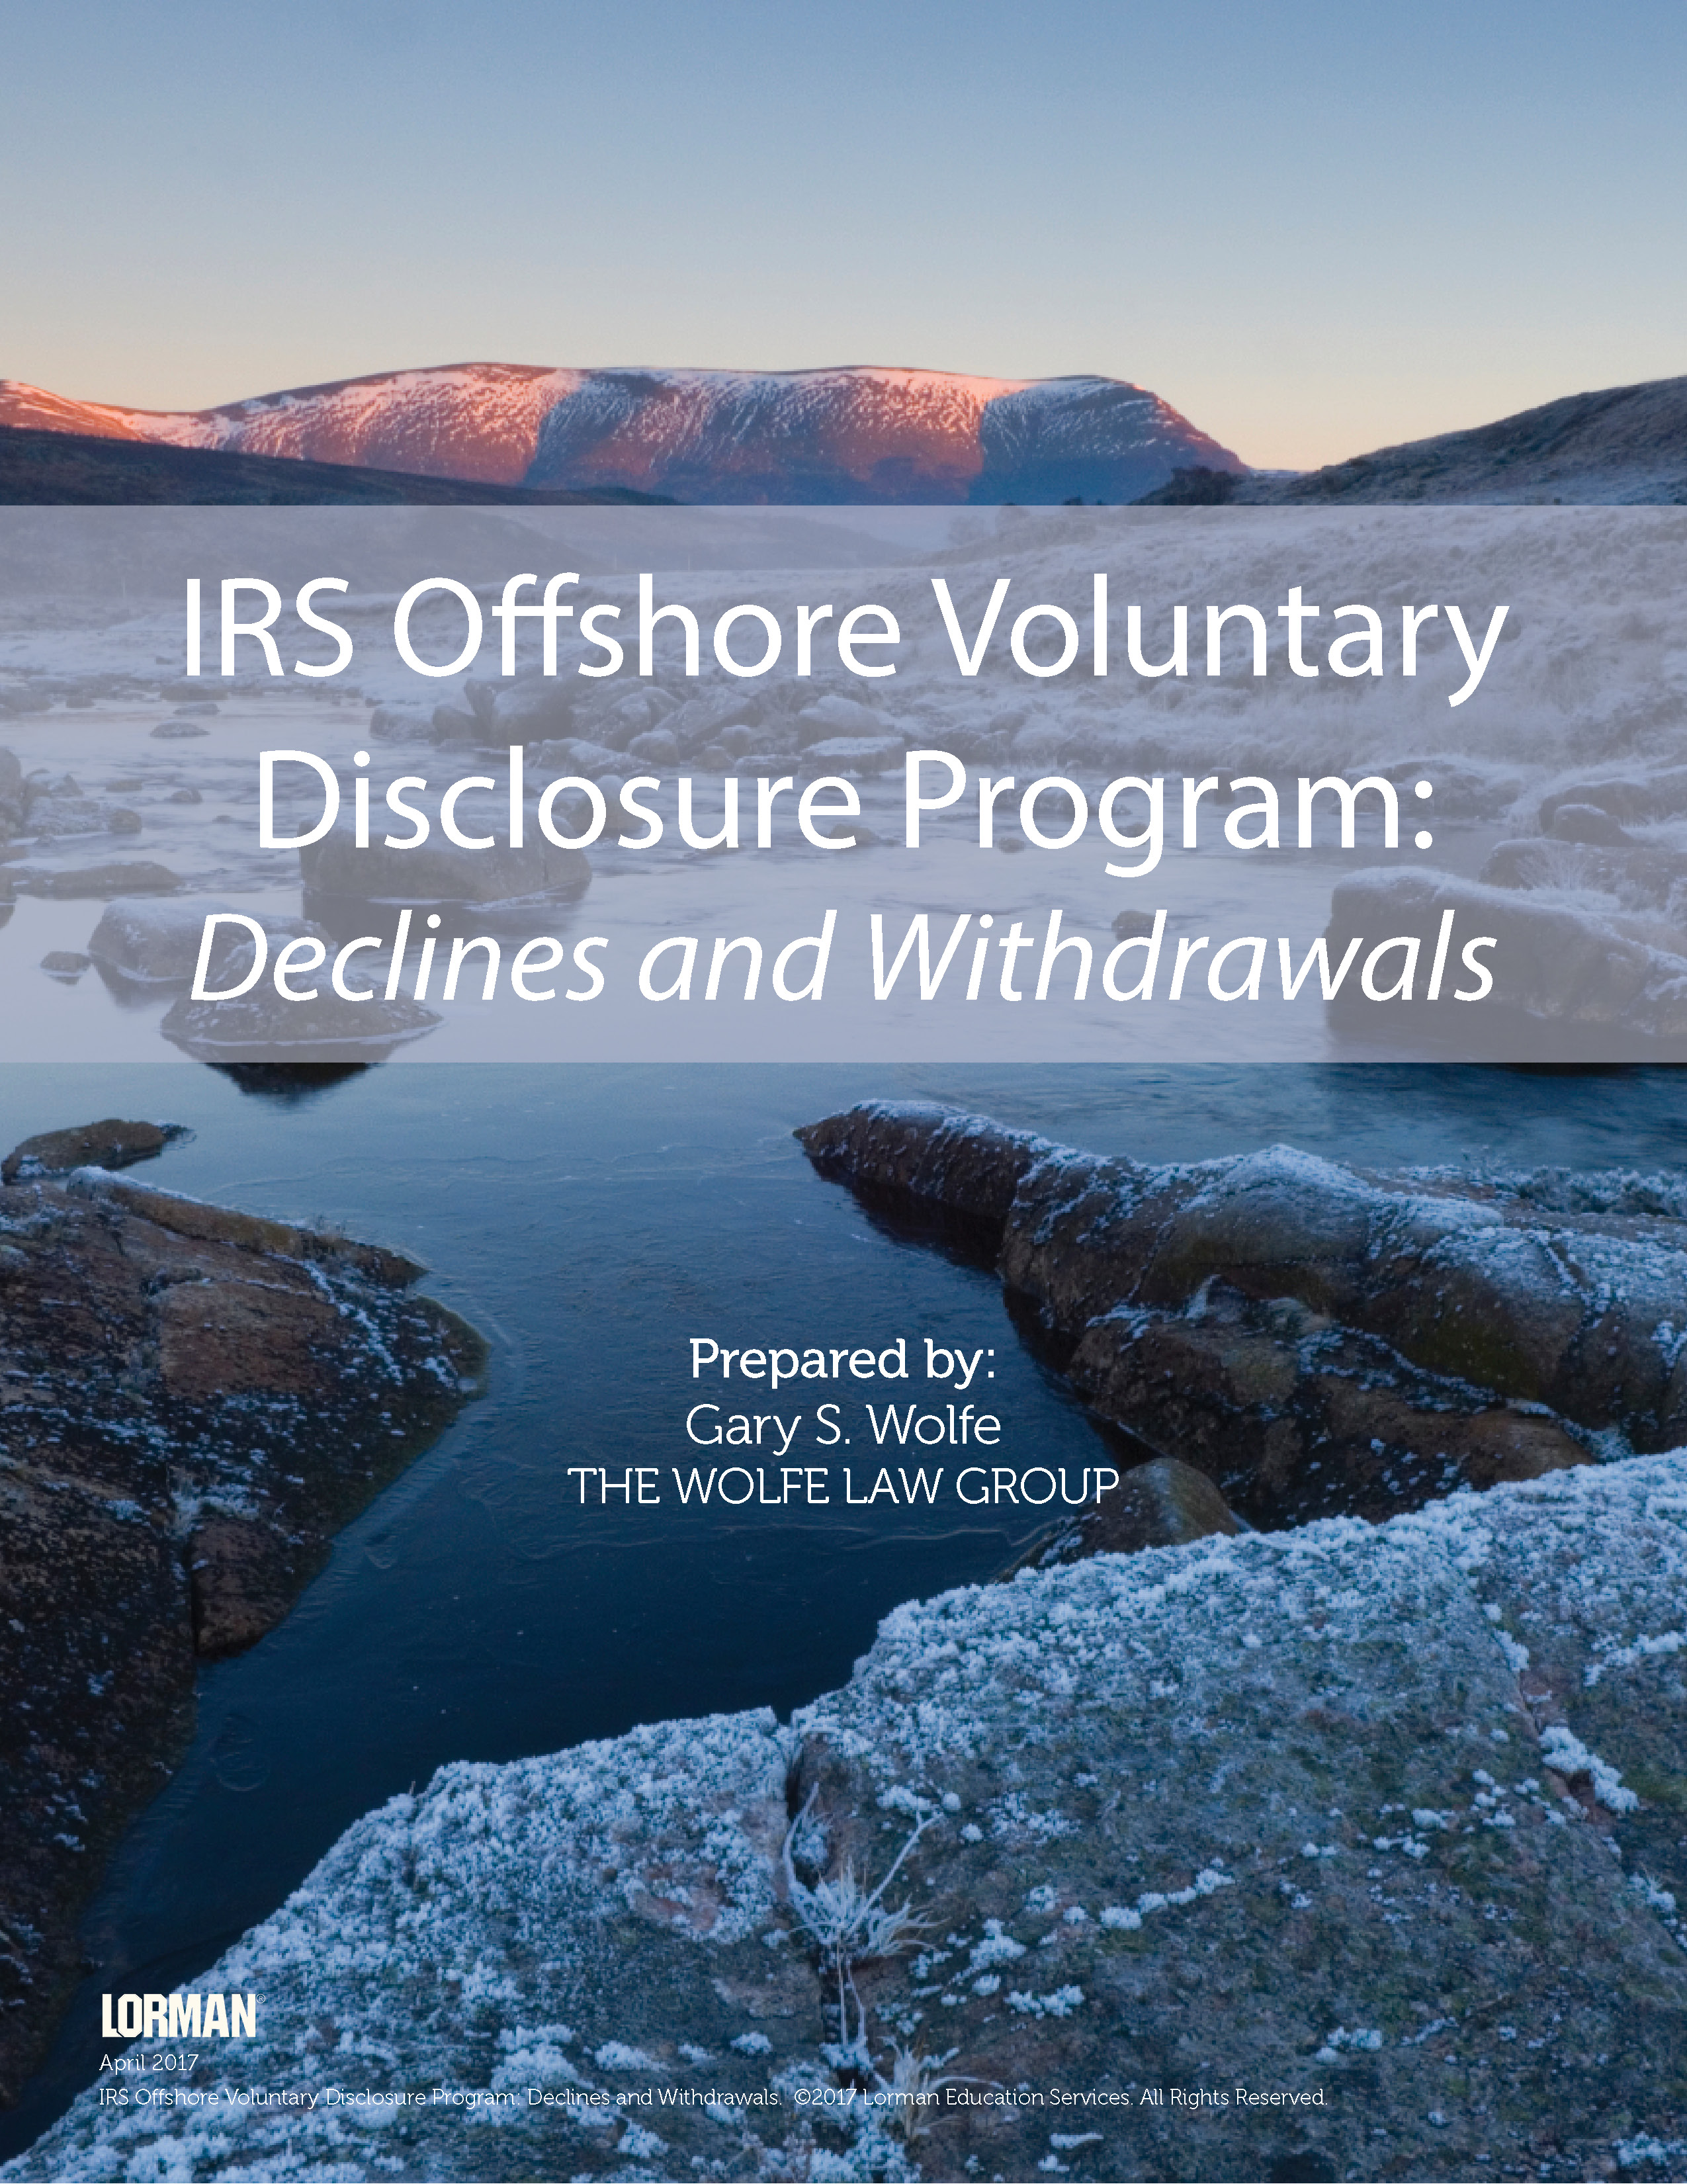 IRS Offshore Voluntary Disclosure Program: Declines and Withdrawals